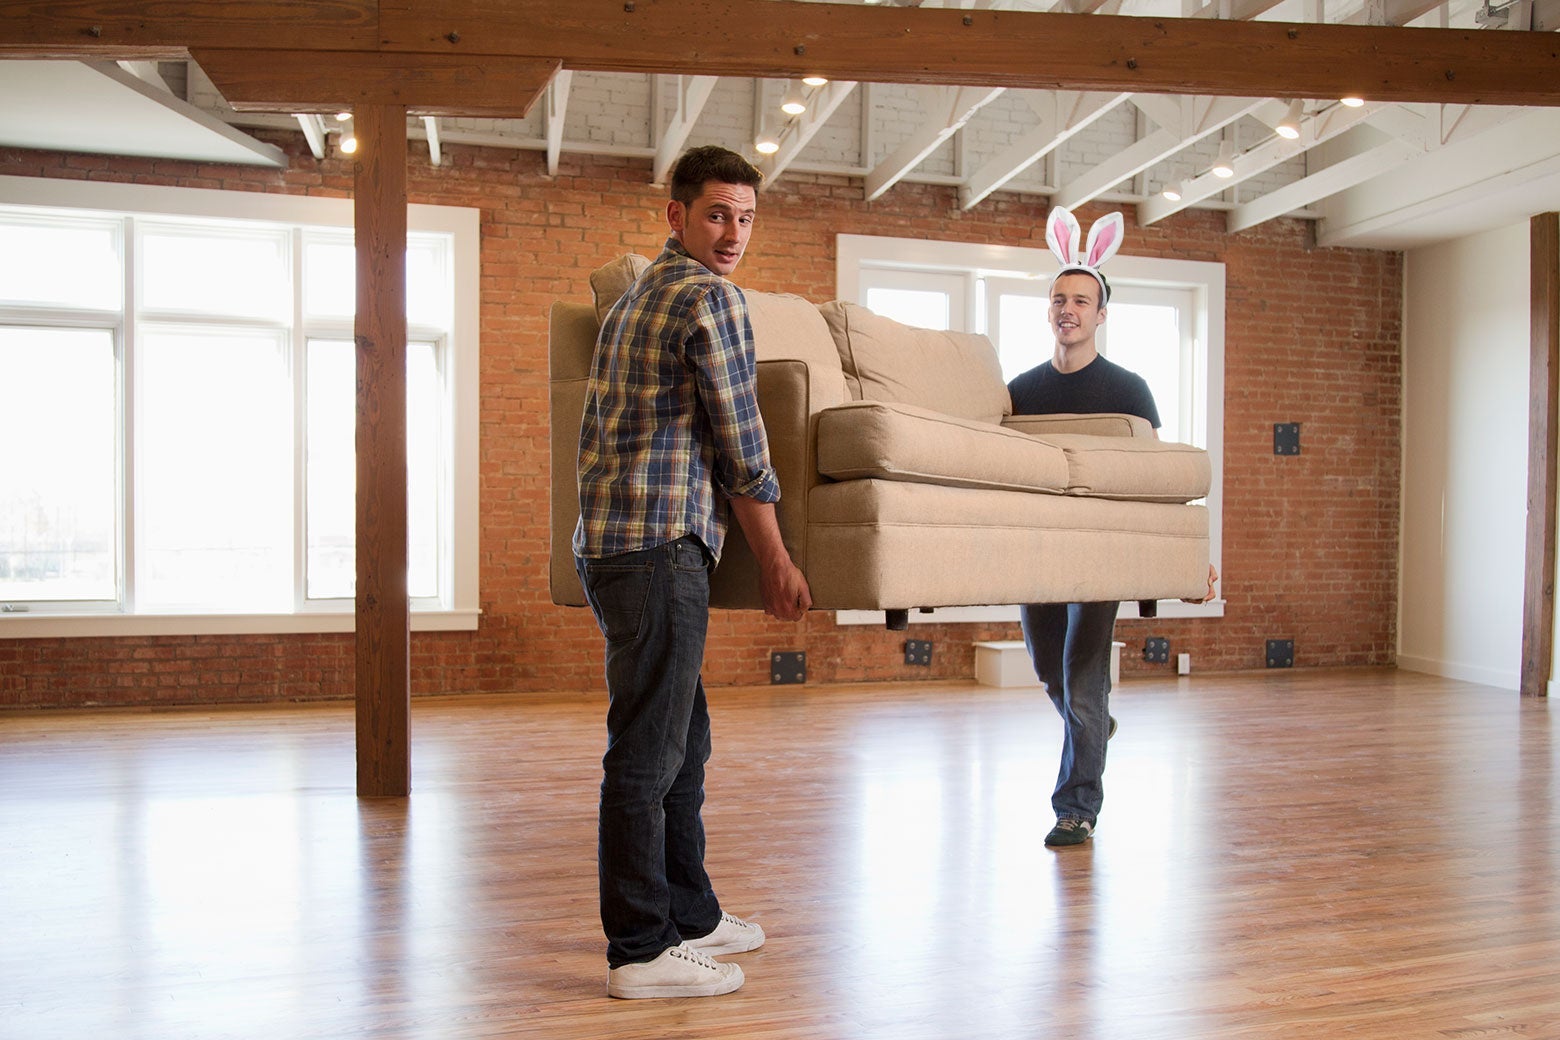 Two people moving a couch, but one has been illustrated to wear bunny ears.